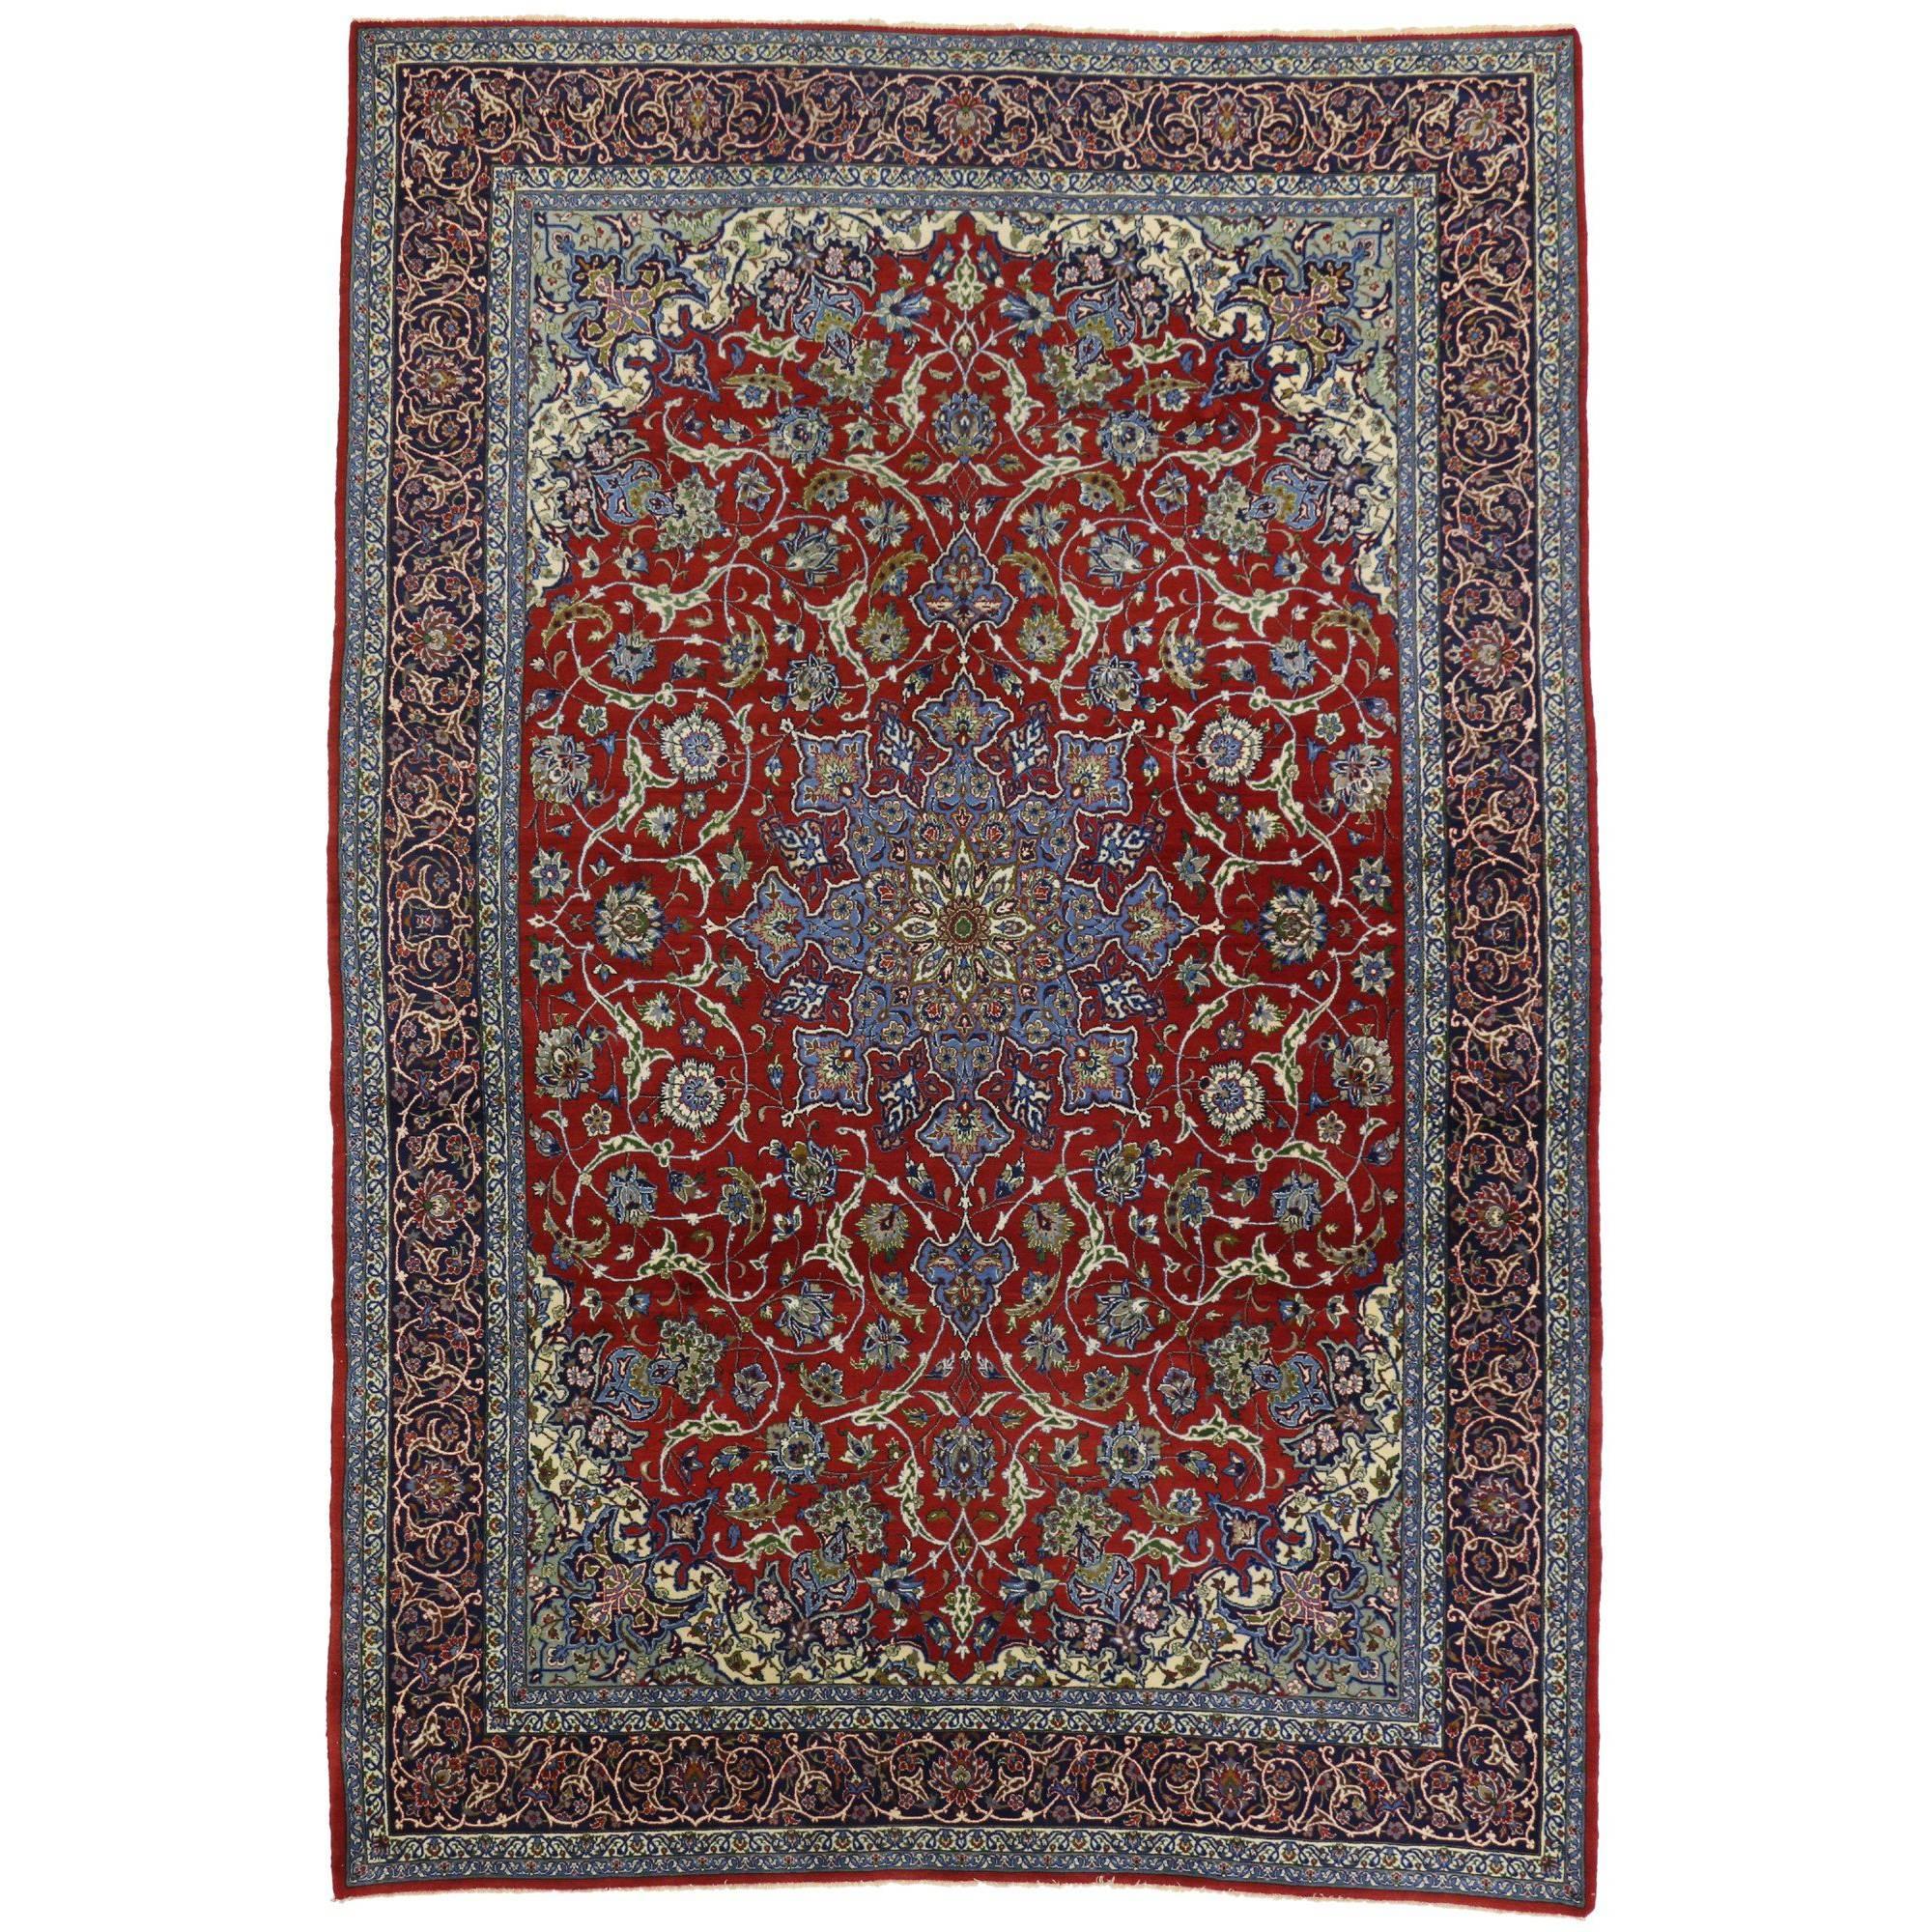 Vintage Persian Isfahan Rug with Shah Abba Design and Arabesque Federal Style